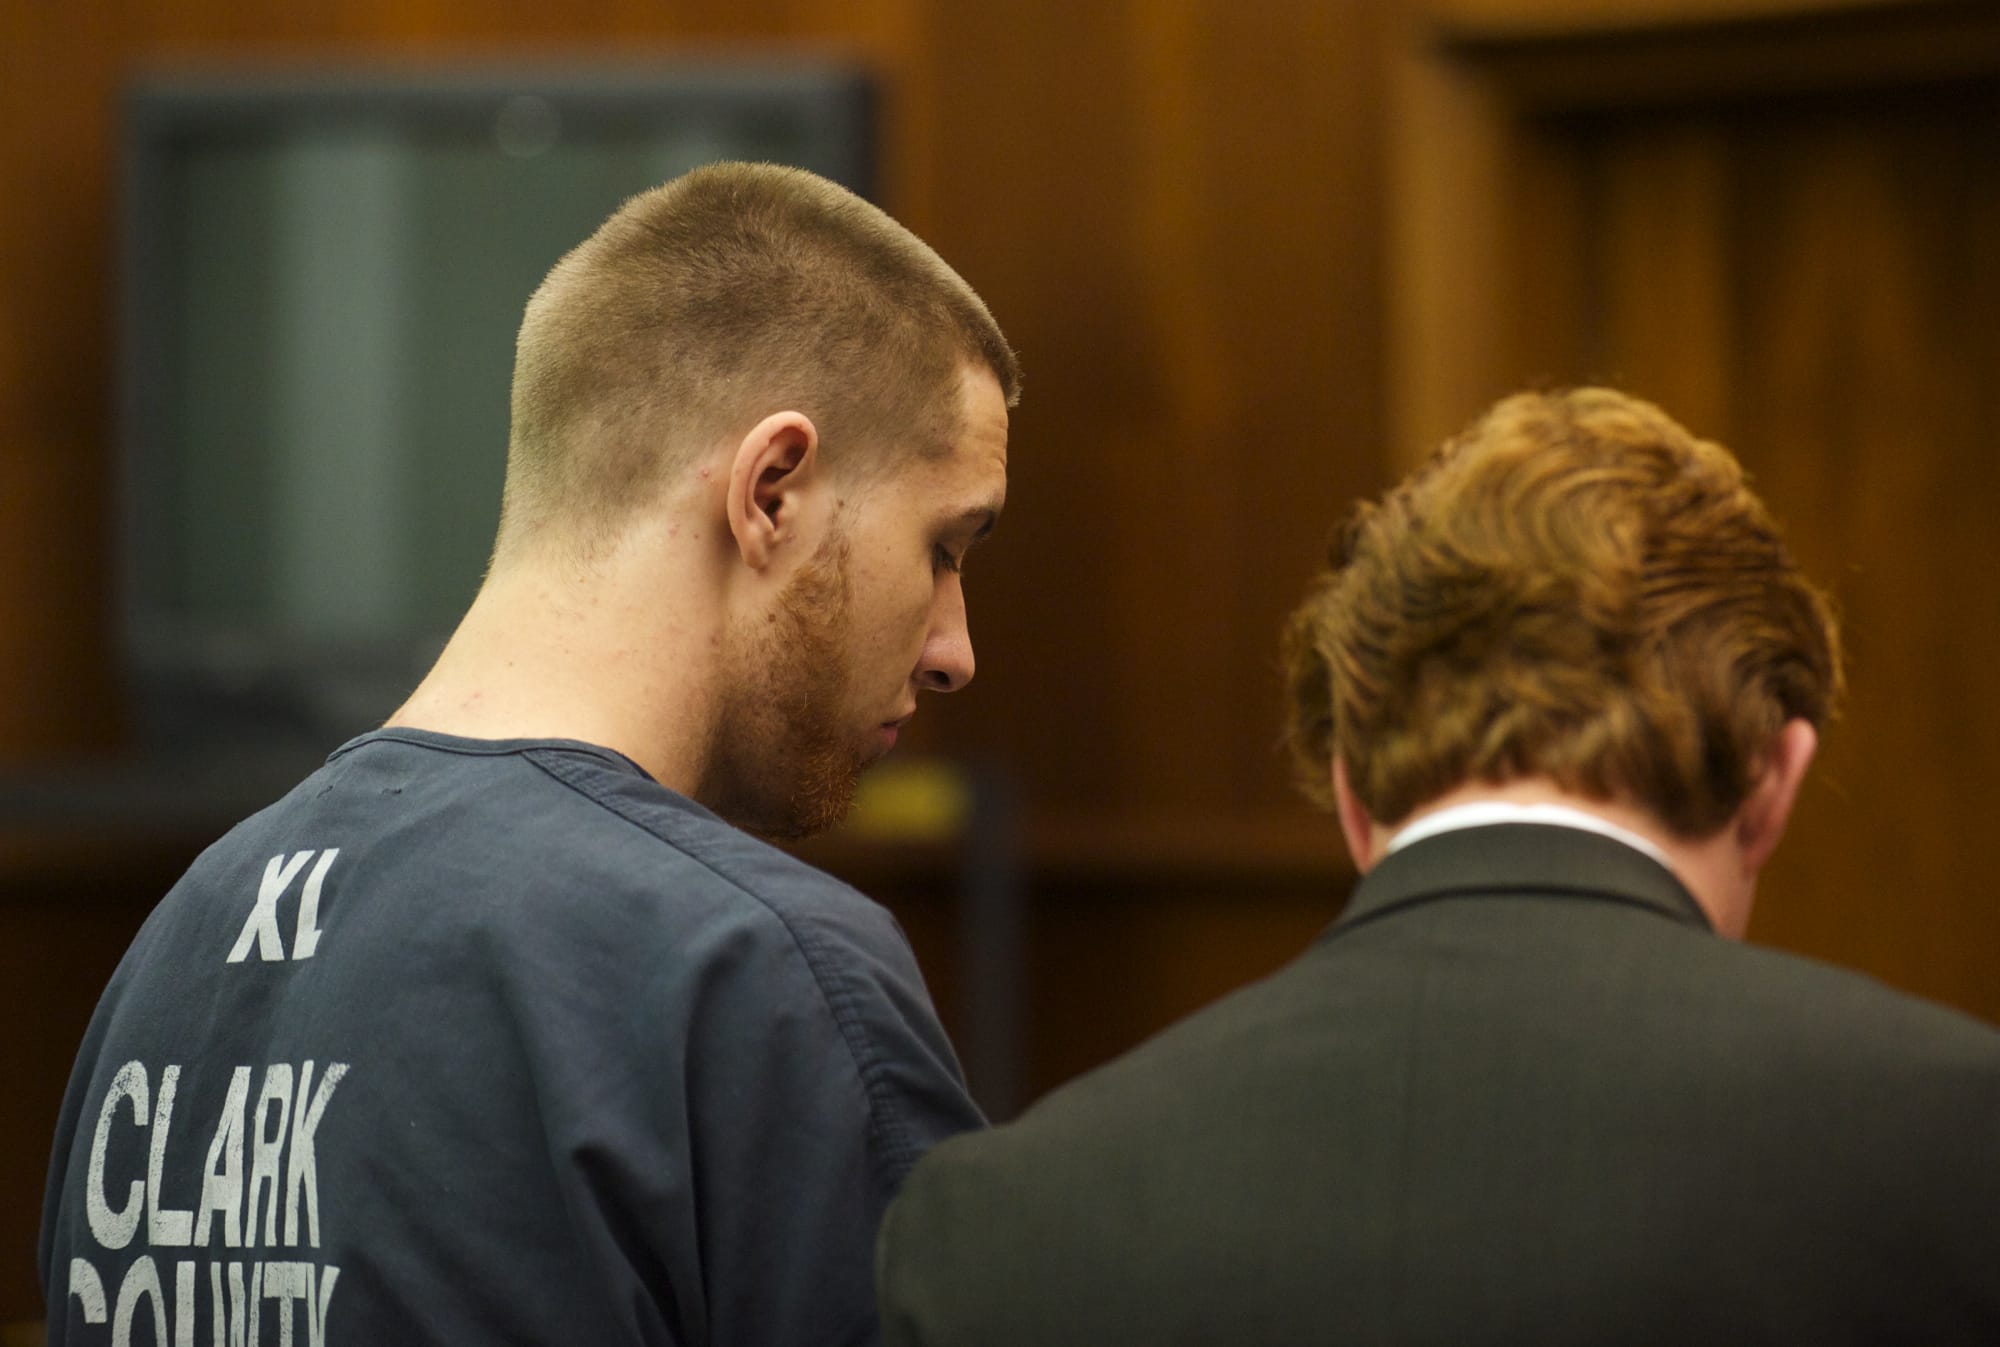 Zachary Mattson plead guilty today in Clark County Superior Court to first-degree rendering criminal assistance in the 2012 homicide of Joshua R.